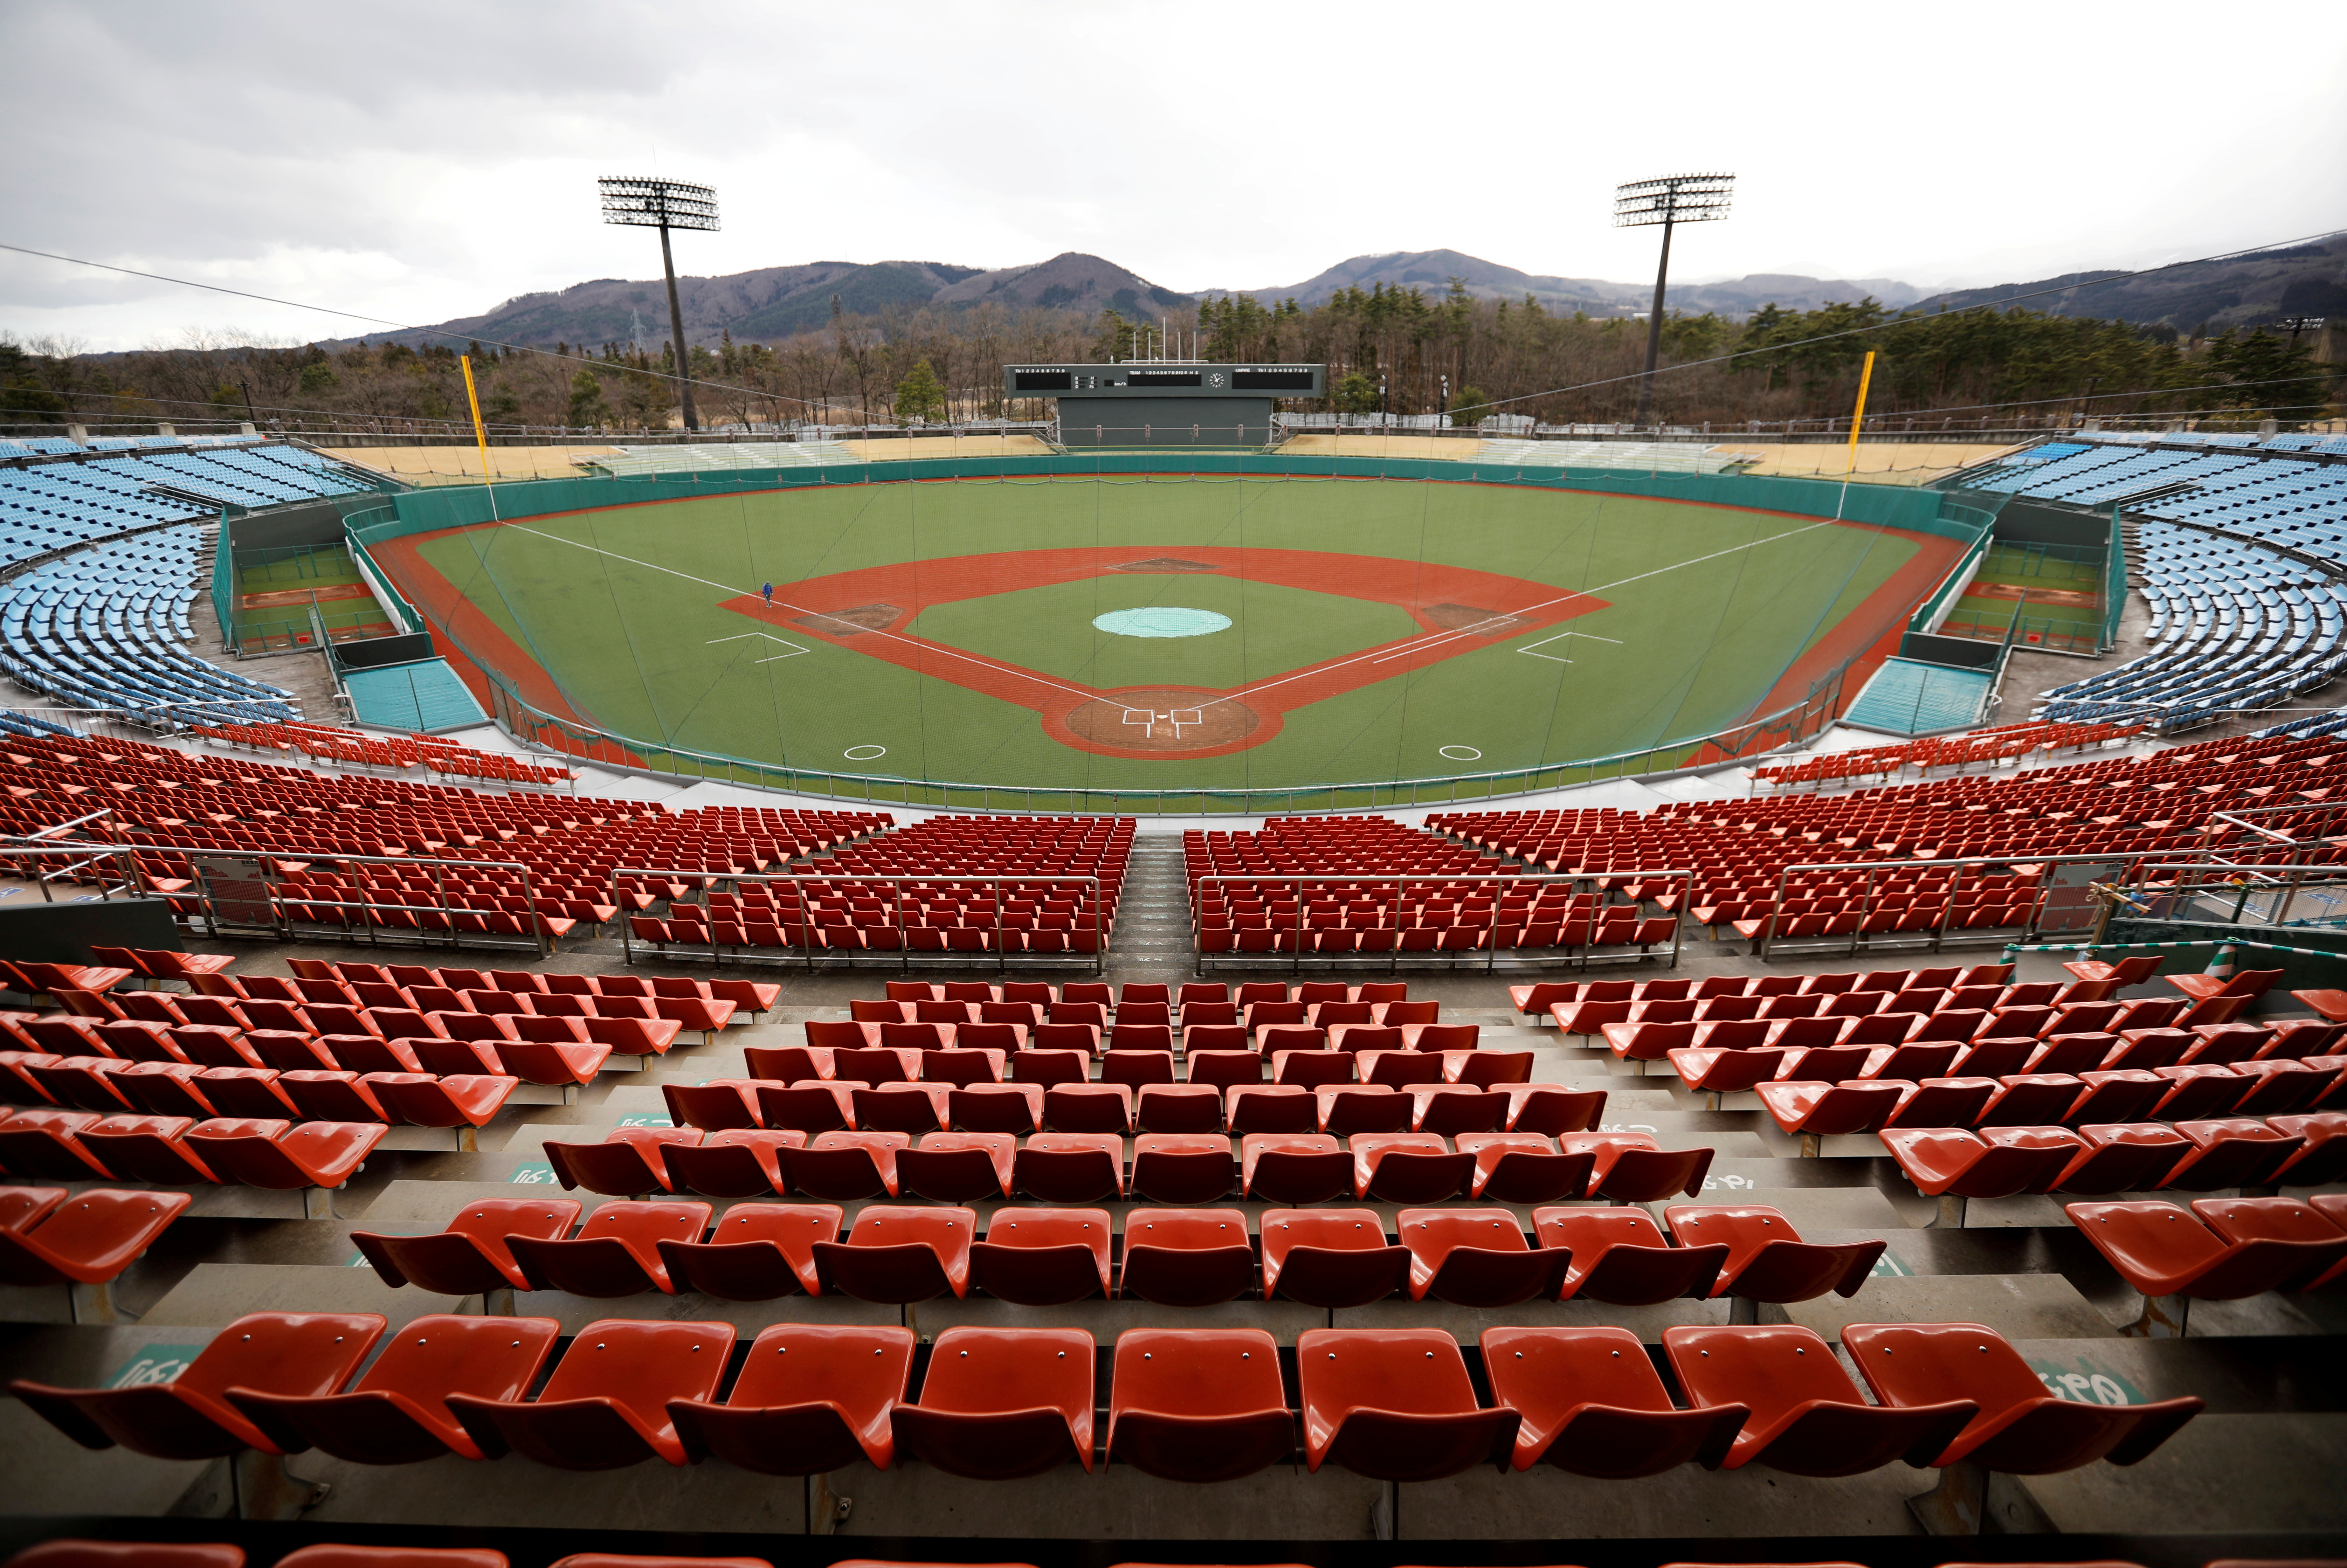 Fukushima Azuma Baseball Stadium, which will host the baseball and softball competitions during the Tokyo 2020 Olympic Games, is seen in Fukushima, Japan, February 19, 2020. REUTERS/Issei Kato/File Photo